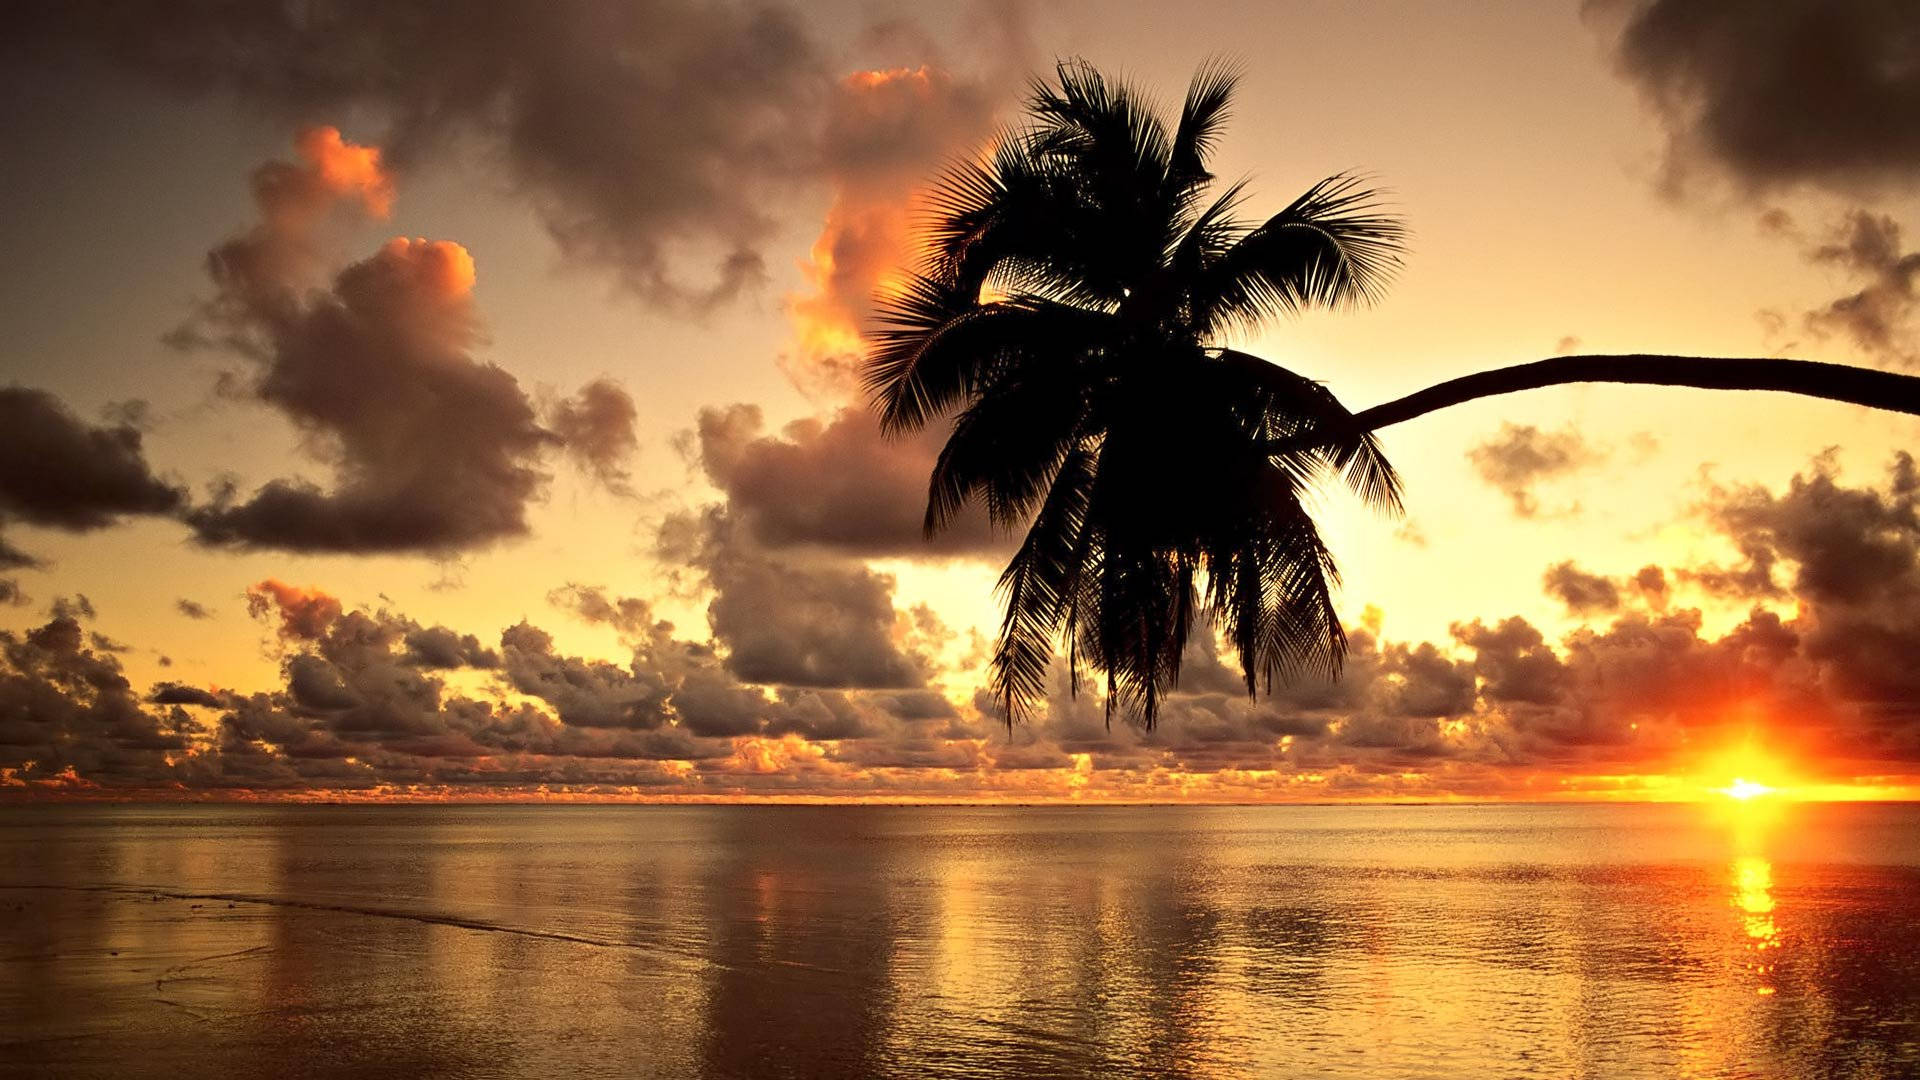 Cloudy Weather With Palm Tree Wallpaper